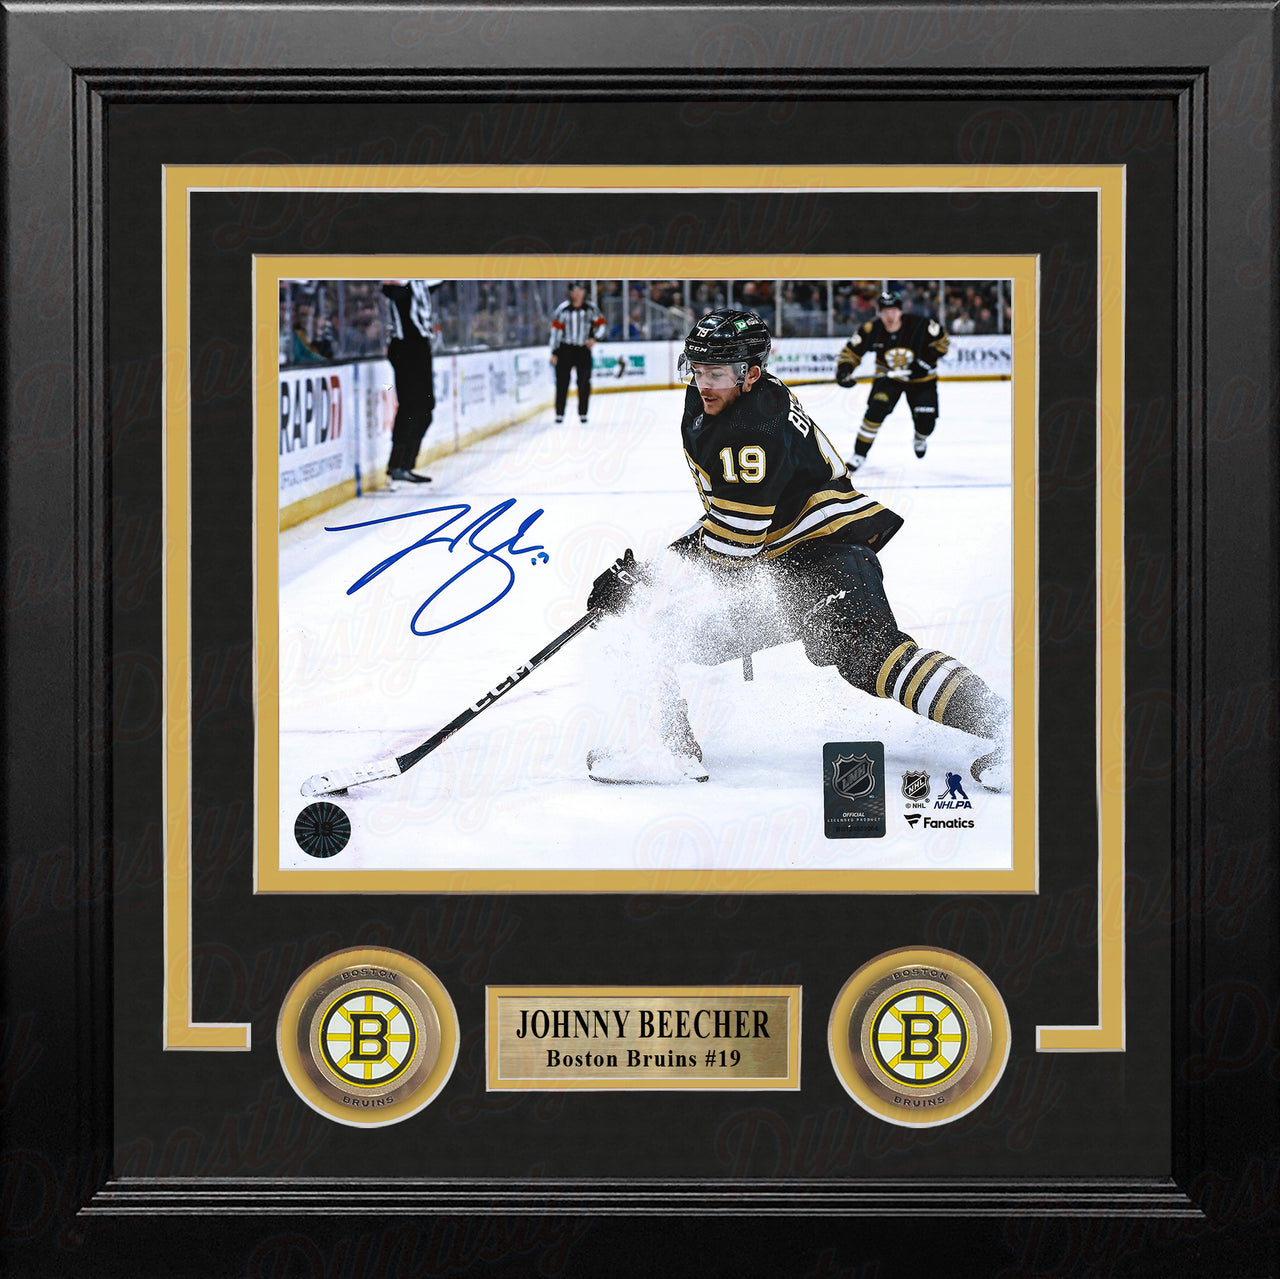 Johnny Beecher in Action Boston Bruins Autographed 8" x 10" Framed Hockey Photo